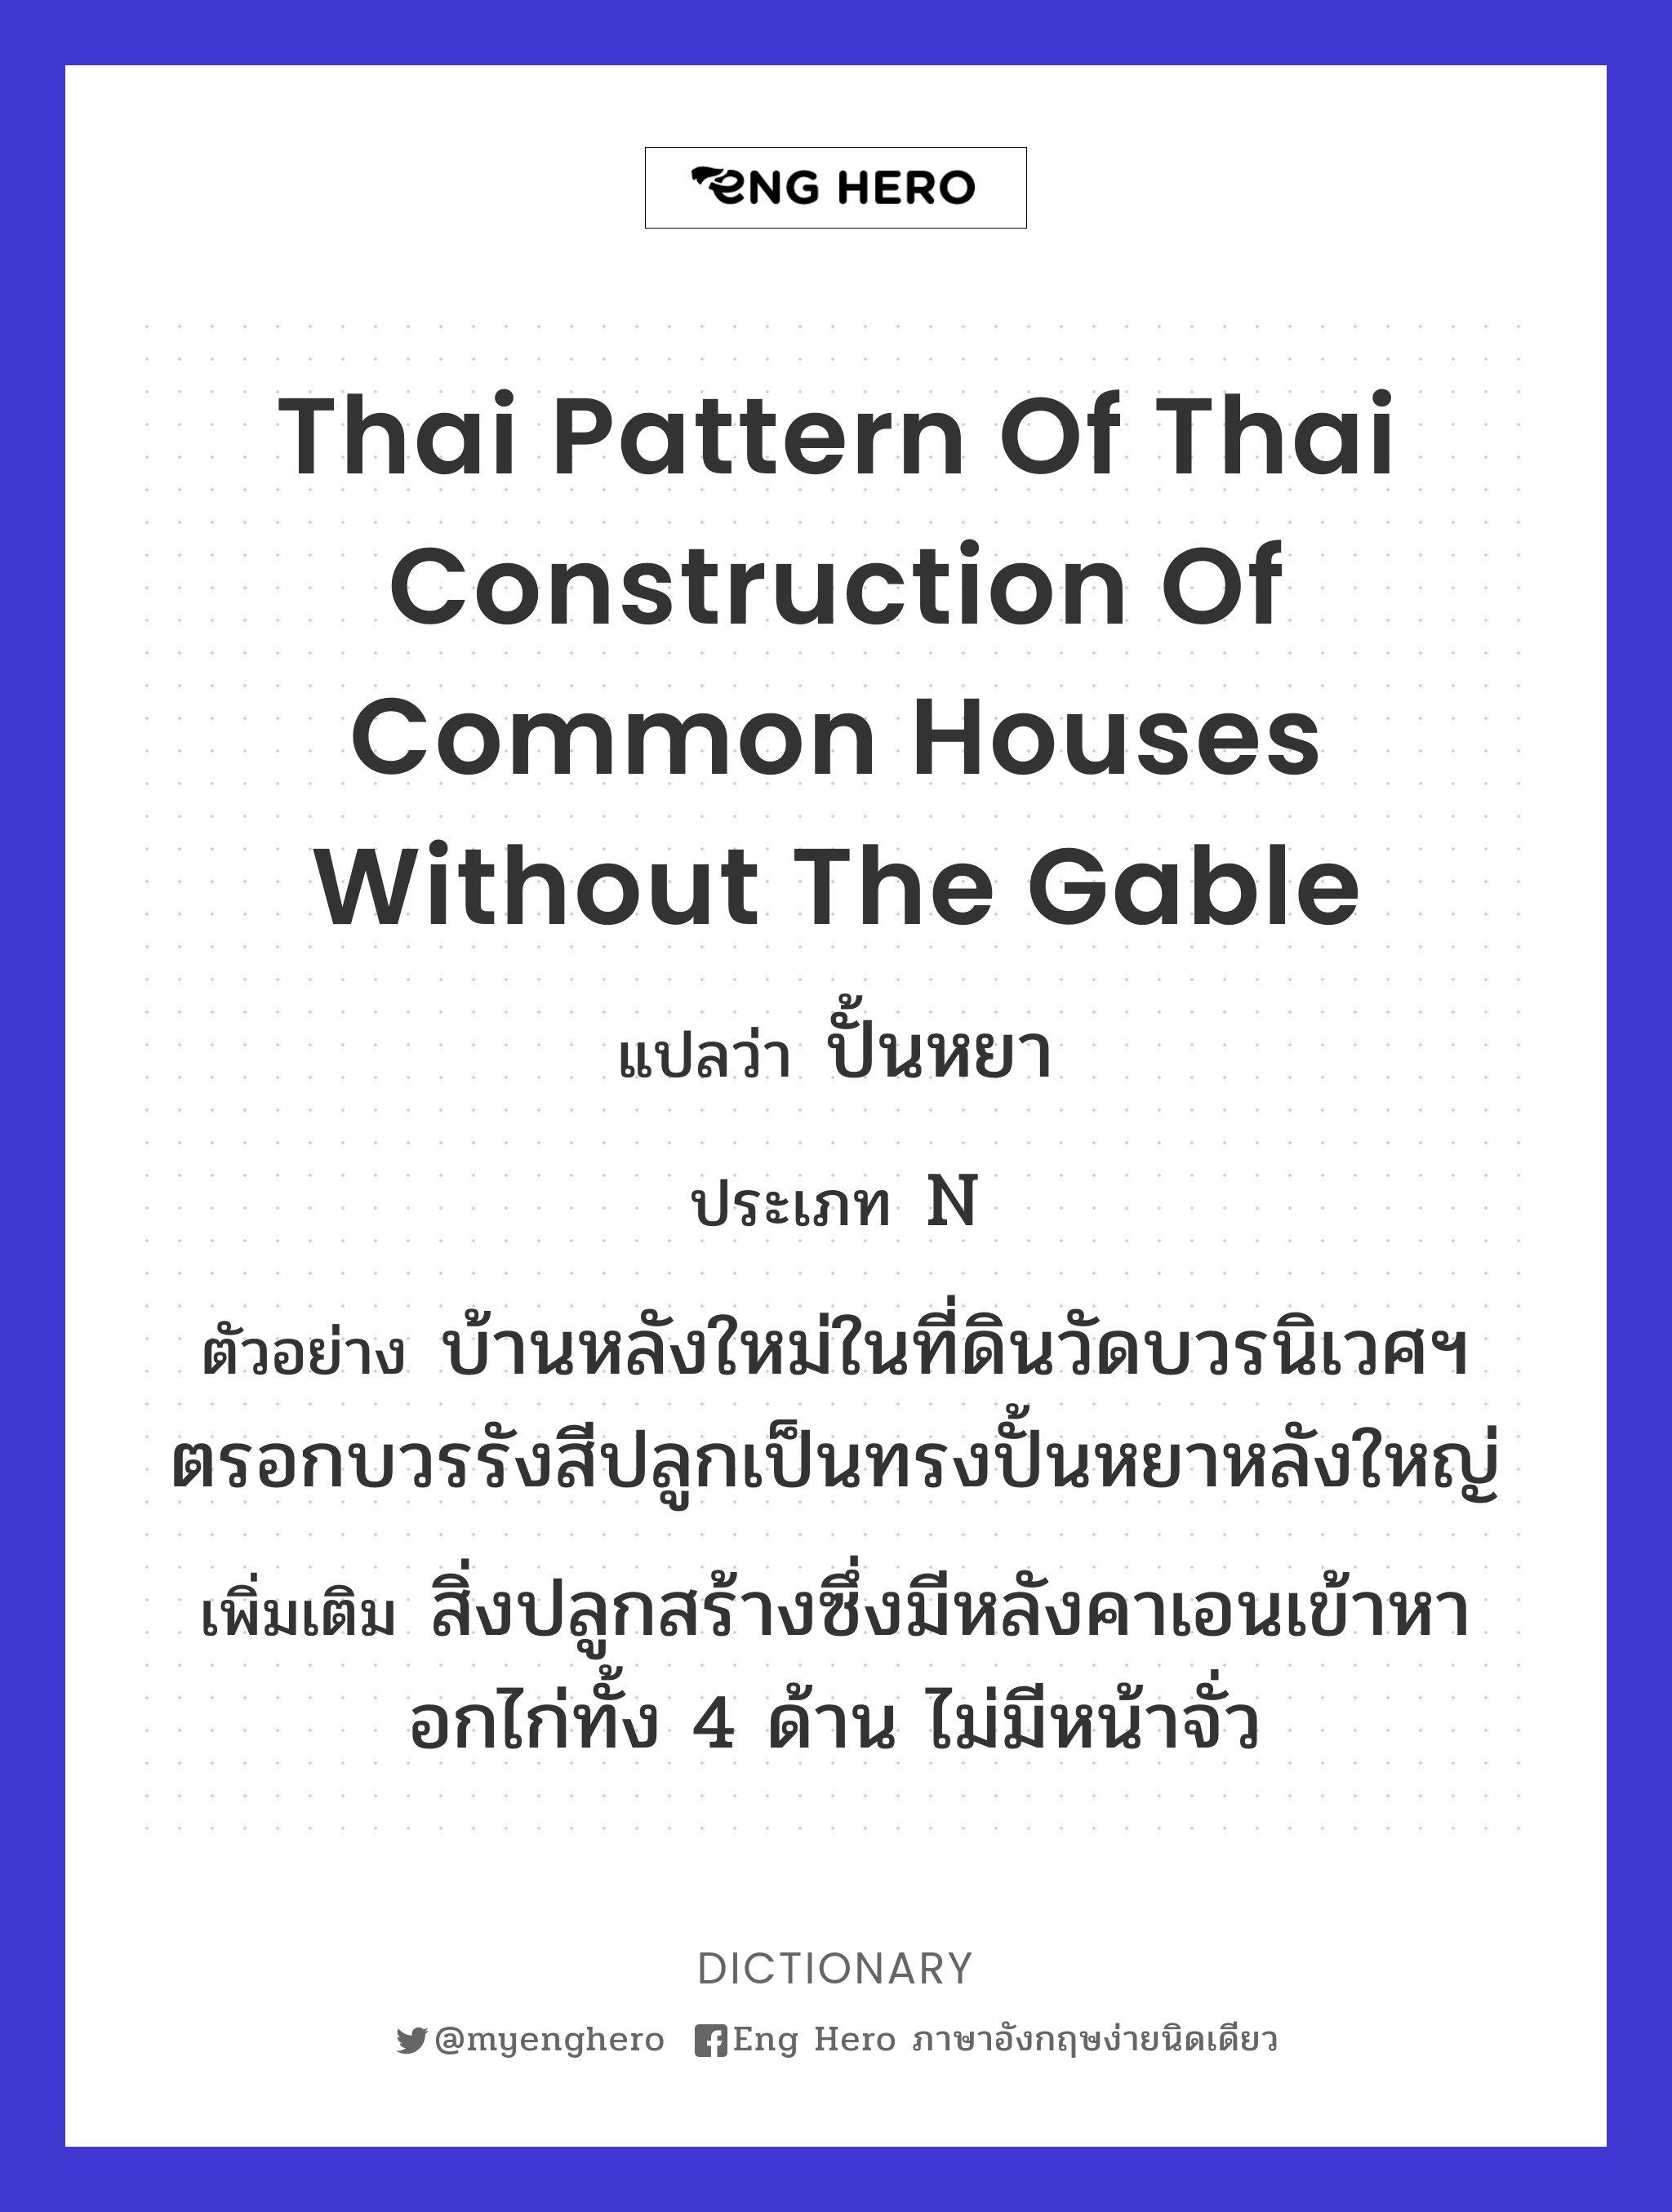 Thai pattern of Thai construction of common houses without the gable